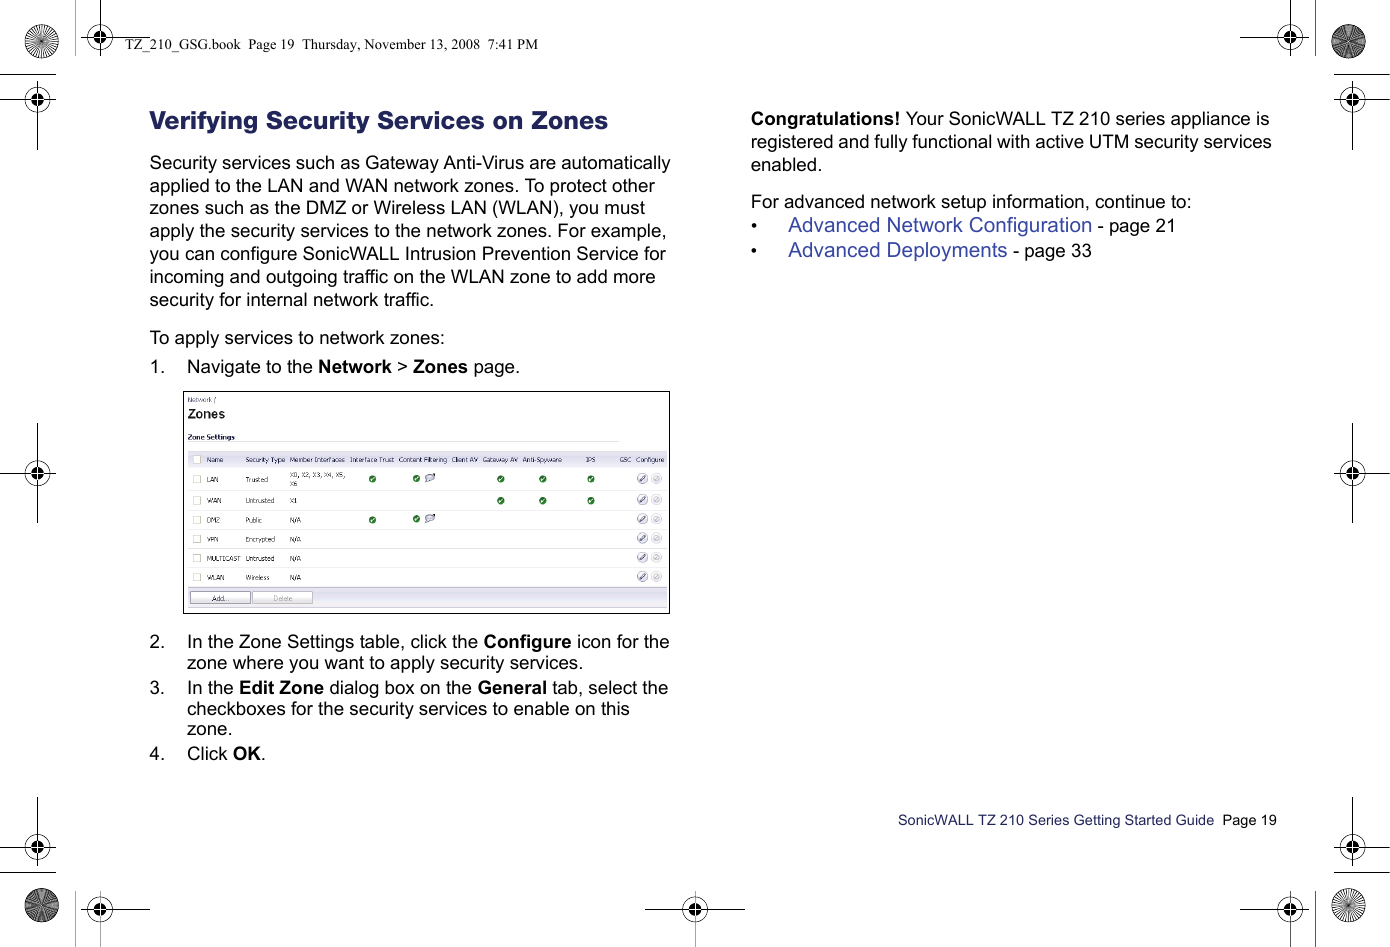 SonicWALL TZ 210 Series Getting Started Guide  Page 19Verifying Security Services on ZonesSecurity services such as Gateway Anti-Virus are automatically applied to the LAN and WAN network zones. To protect other zones such as the DMZ or Wireless LAN (WLAN), you must apply the security services to the network zones. For example, you can configure SonicWALL Intrusion Prevention Service for incoming and outgoing traffic on the WLAN zone to add more security for internal network traffic.To apply services to network zones:1. Navigate to the Network &gt; Zones page.2. In the Zone Settings table, click the Configure icon for the zone where you want to apply security services.3. In the Edit Zone dialog box on the General tab, select the checkboxes for the security services to enable on this zone.4. Click OK.Congratulations! Your SonicWALL TZ 210 series appliance is registered and fully functional with active UTM security services enabled.For advanced network setup information, continue to:•Advanced Network Configuration - page 21•Advanced Deployments - page 33TZ_210_GSG.book  Page 19  Thursday, November 13, 2008  7:41 PM